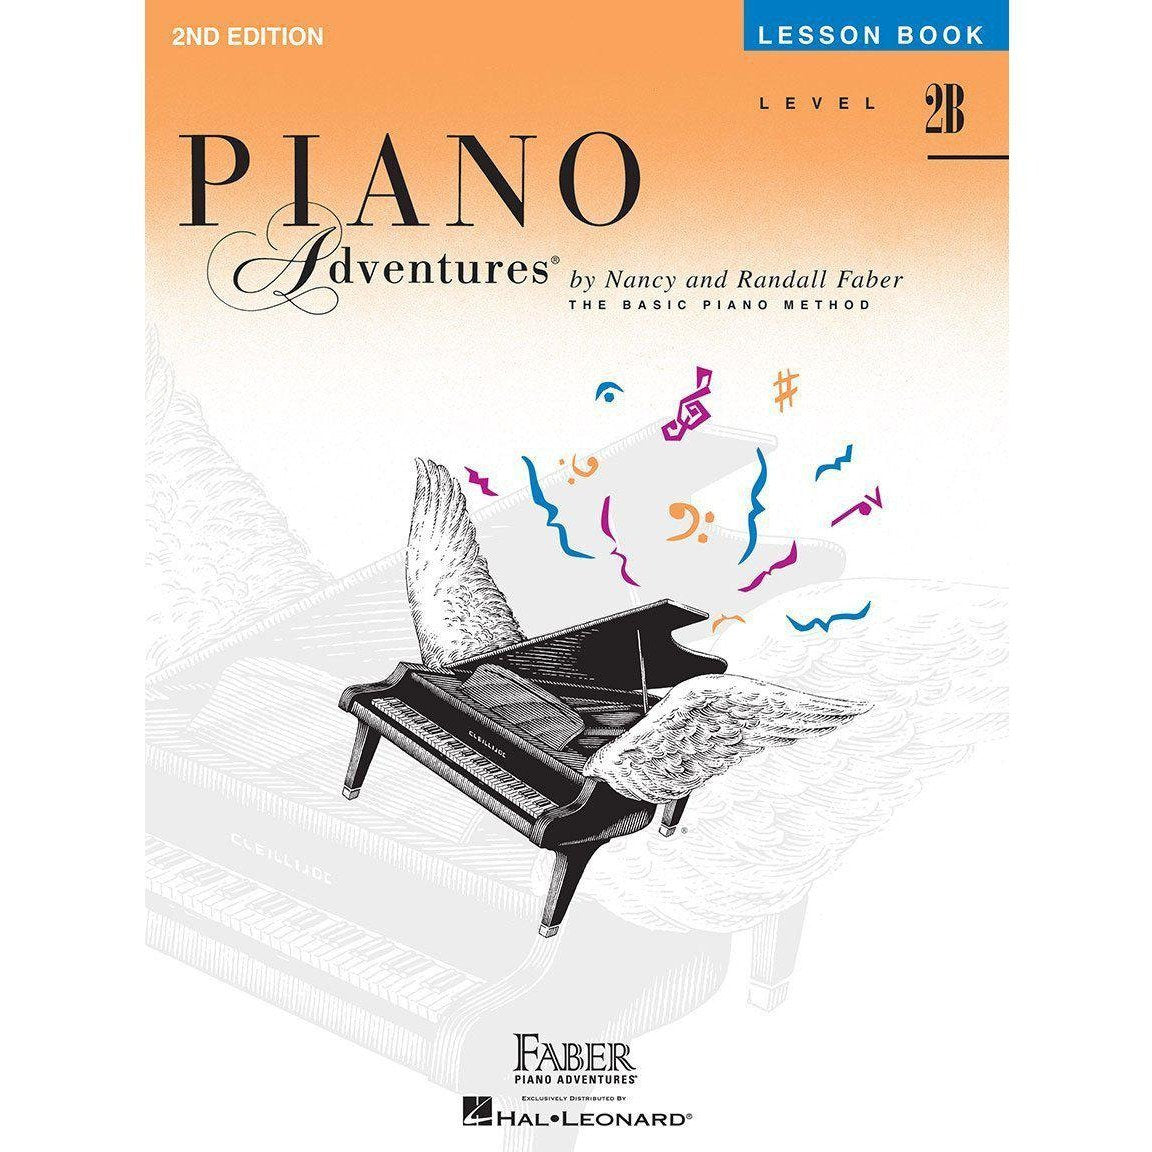 Faber Piano Adventures-2B-Lesson-Andy's Music